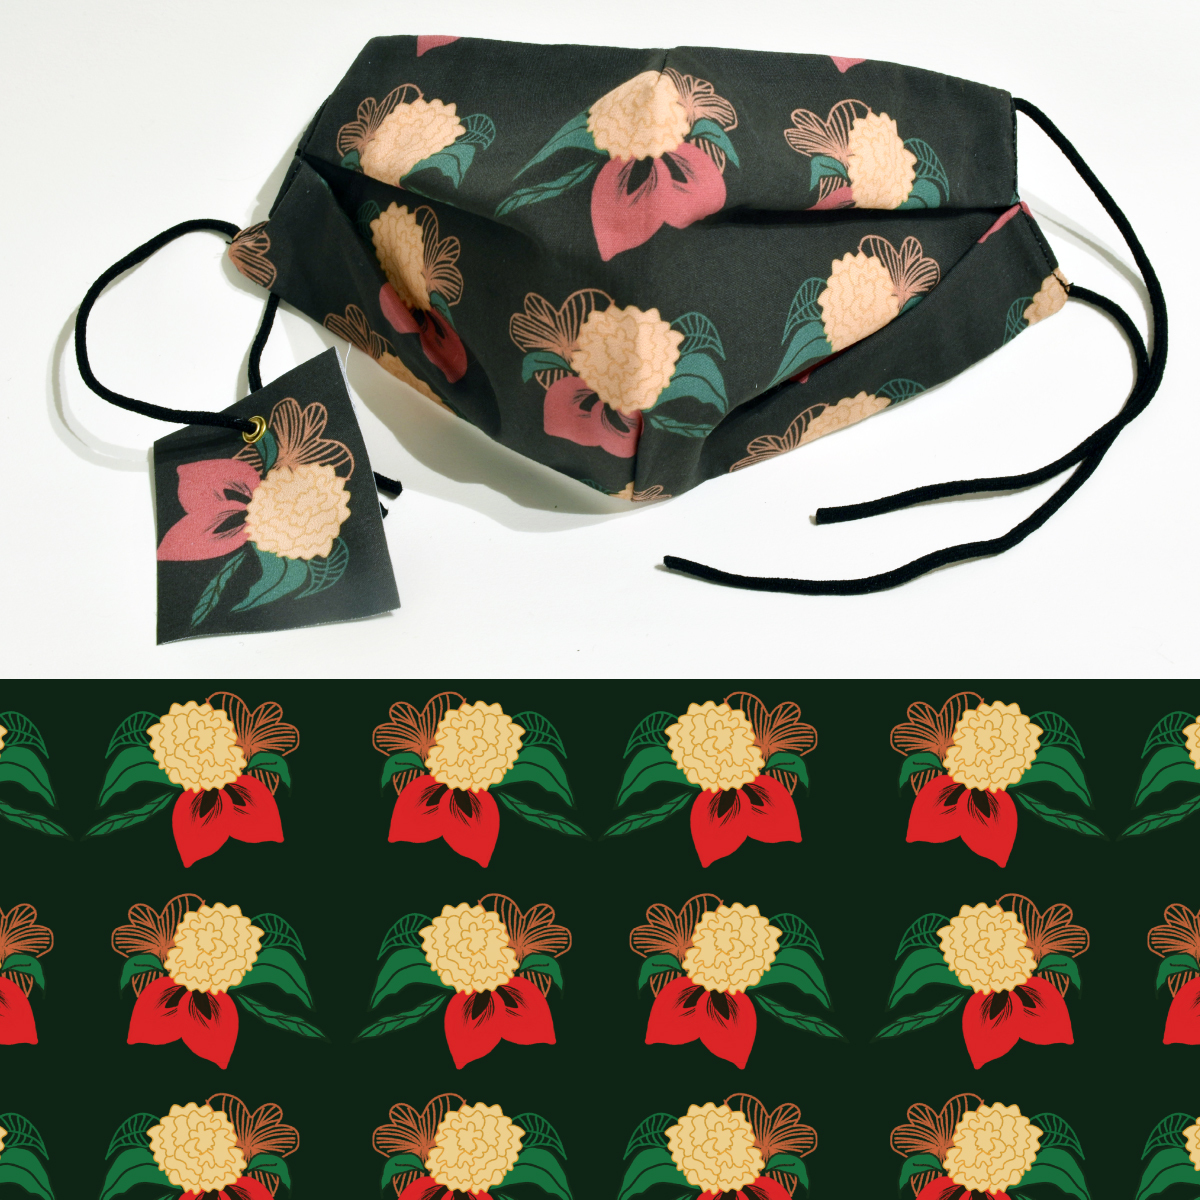 Photo of a fabric mask above a detail image of the fabric pattern: a repeating red, beige, and green floral design on a black background.